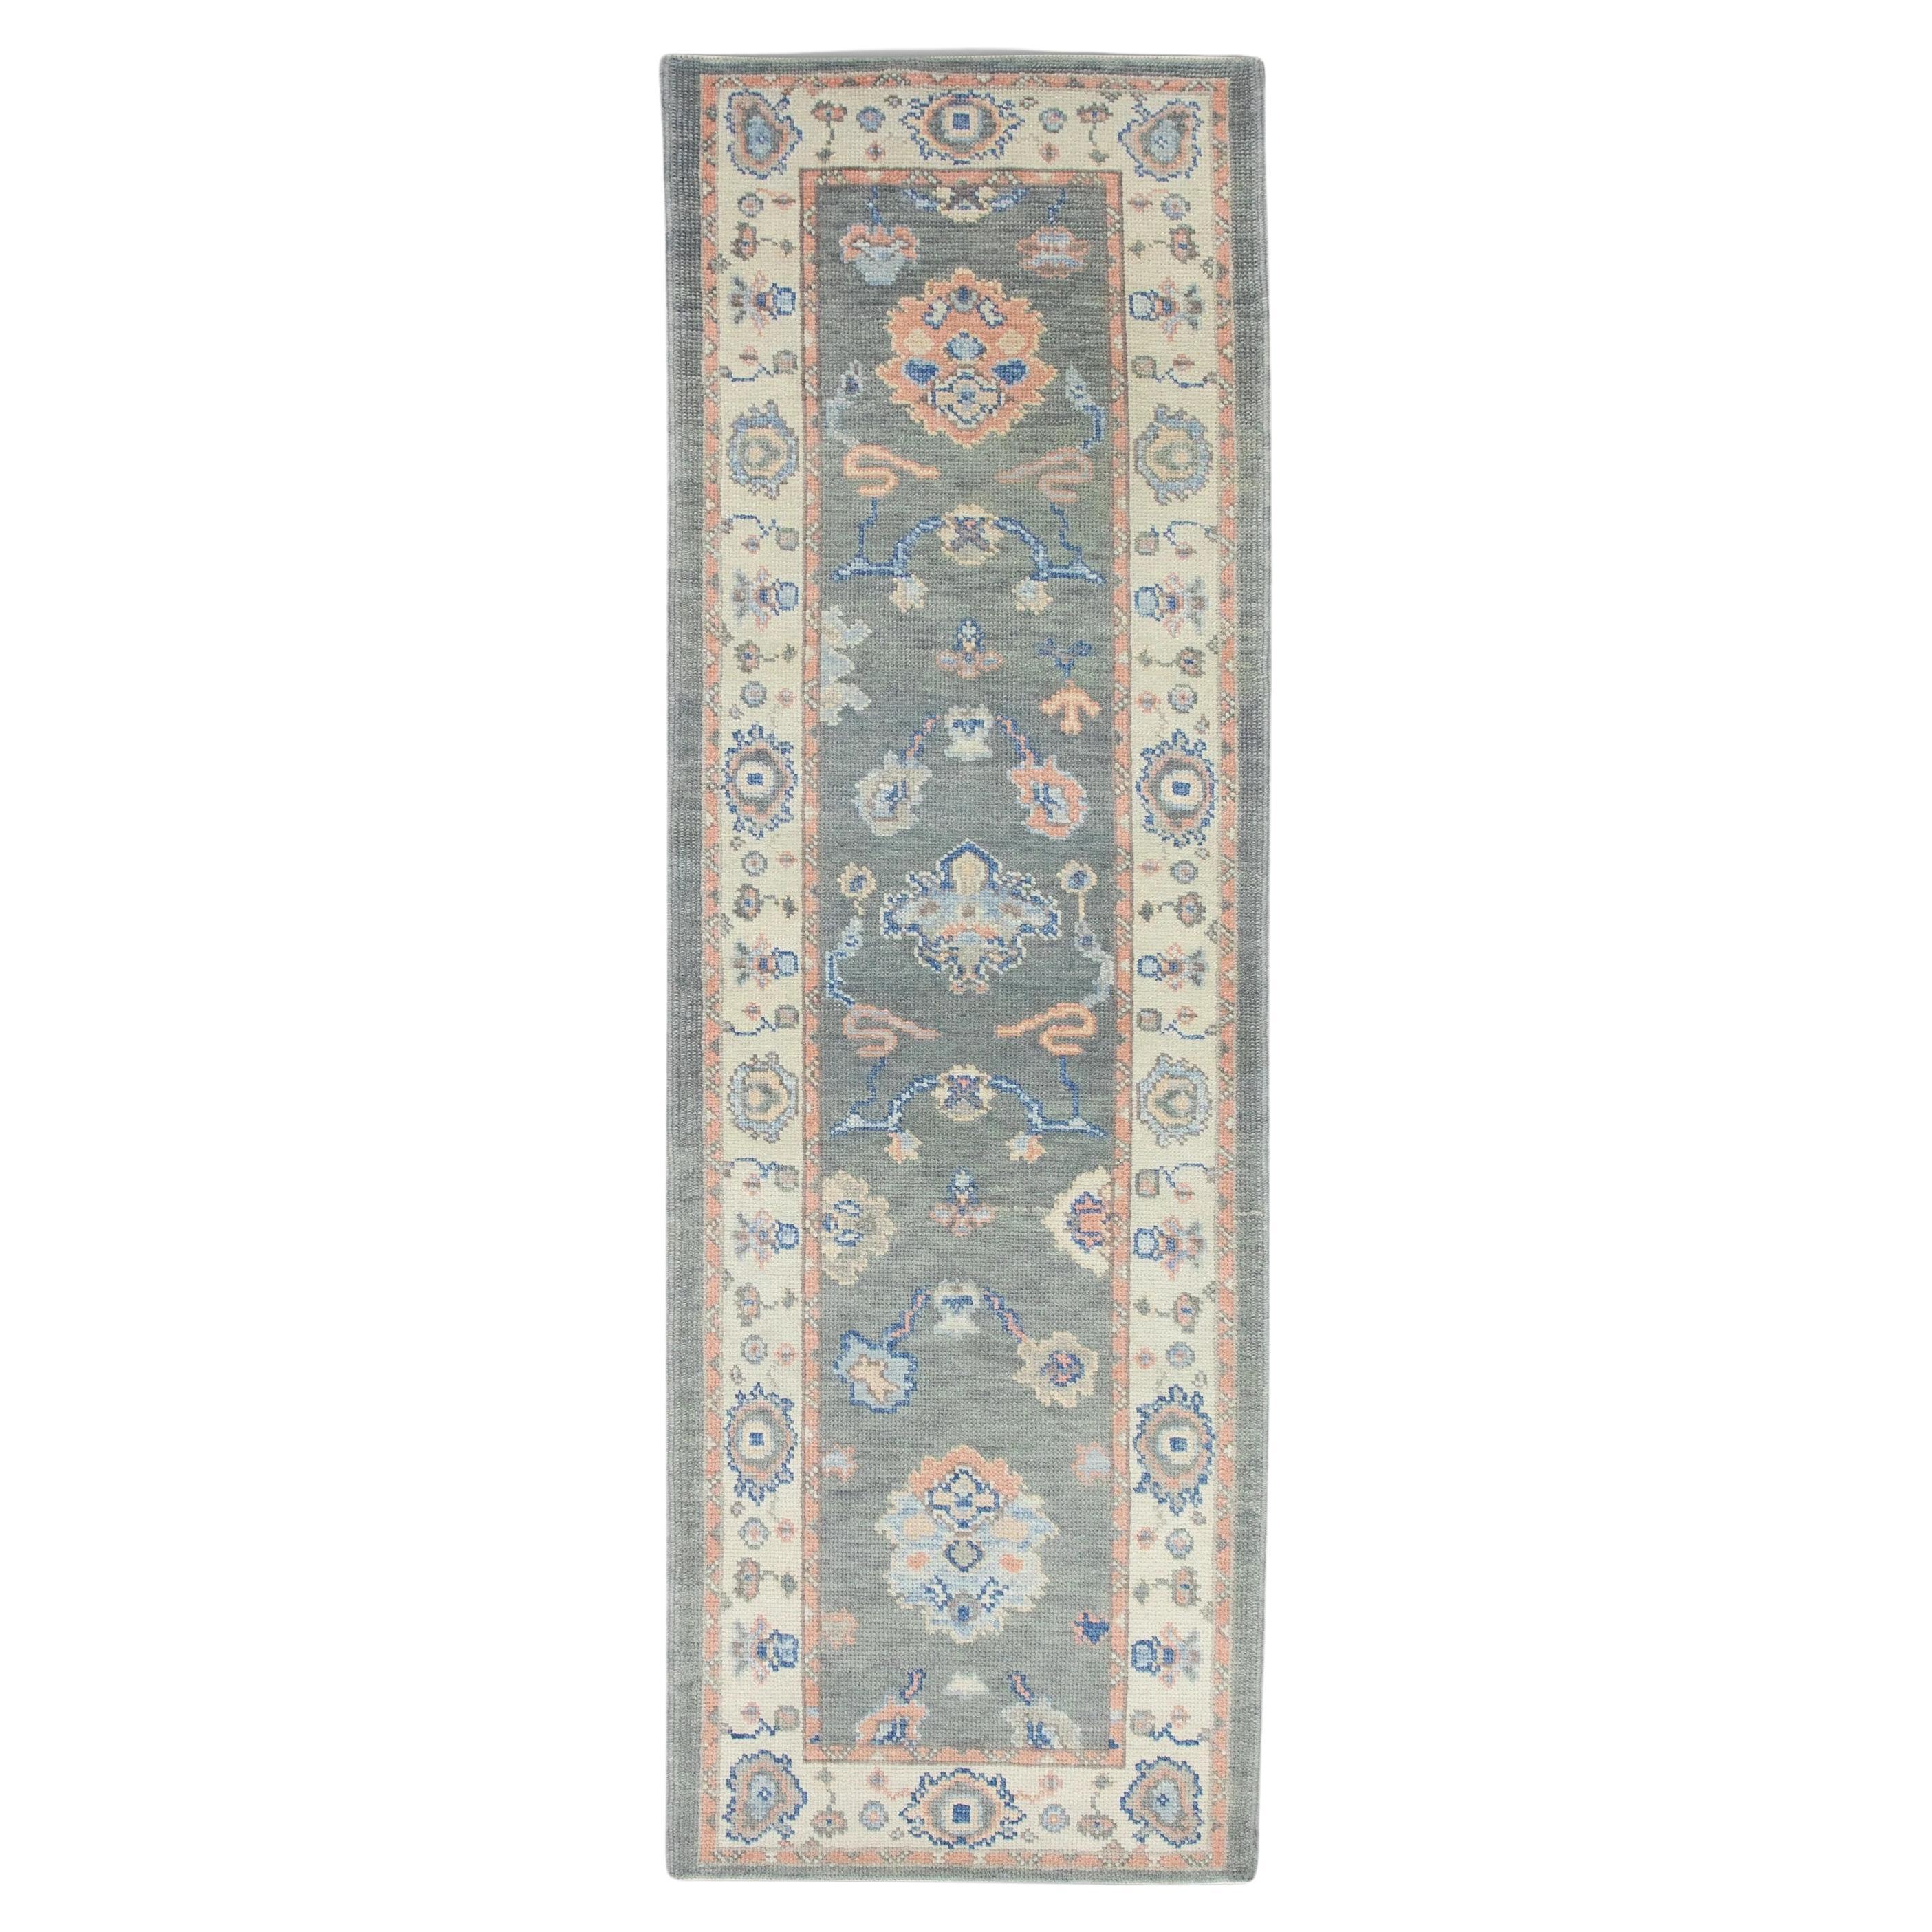 Gray Handwoven Wool Turkish Oushak Rug in Pink & Blue Floral Design 2'7" x 7'11" For Sale